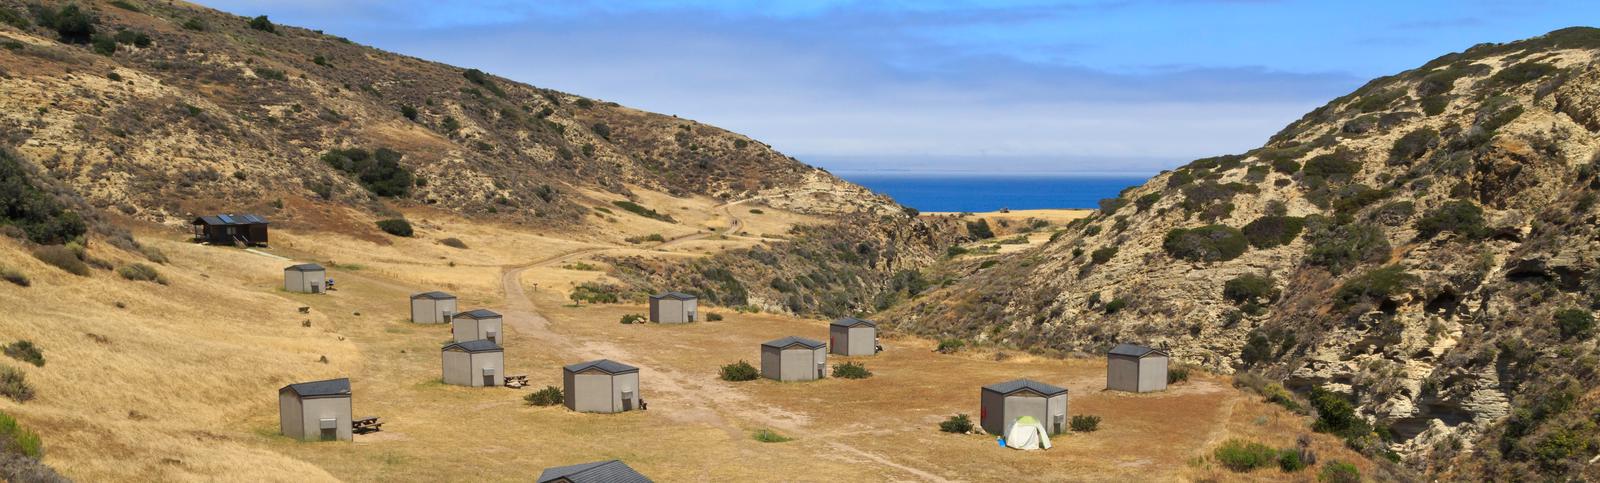 Eight foot tall wind shelters on a dry, grassy terrace overlooking the oceanSanta Rosa campground